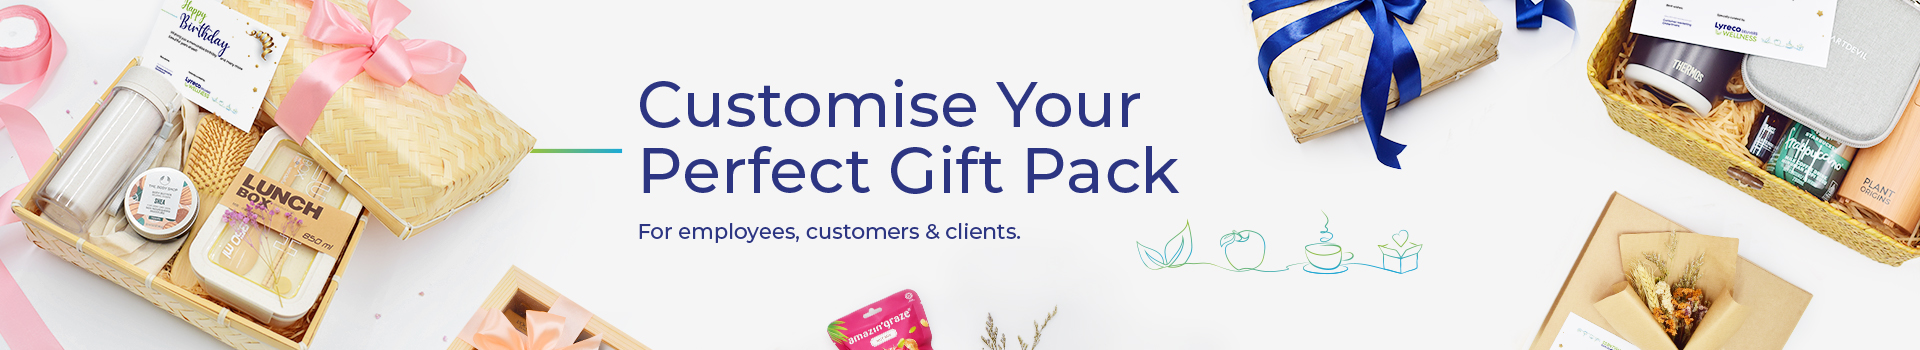 customise_your_perfect_gift_pack